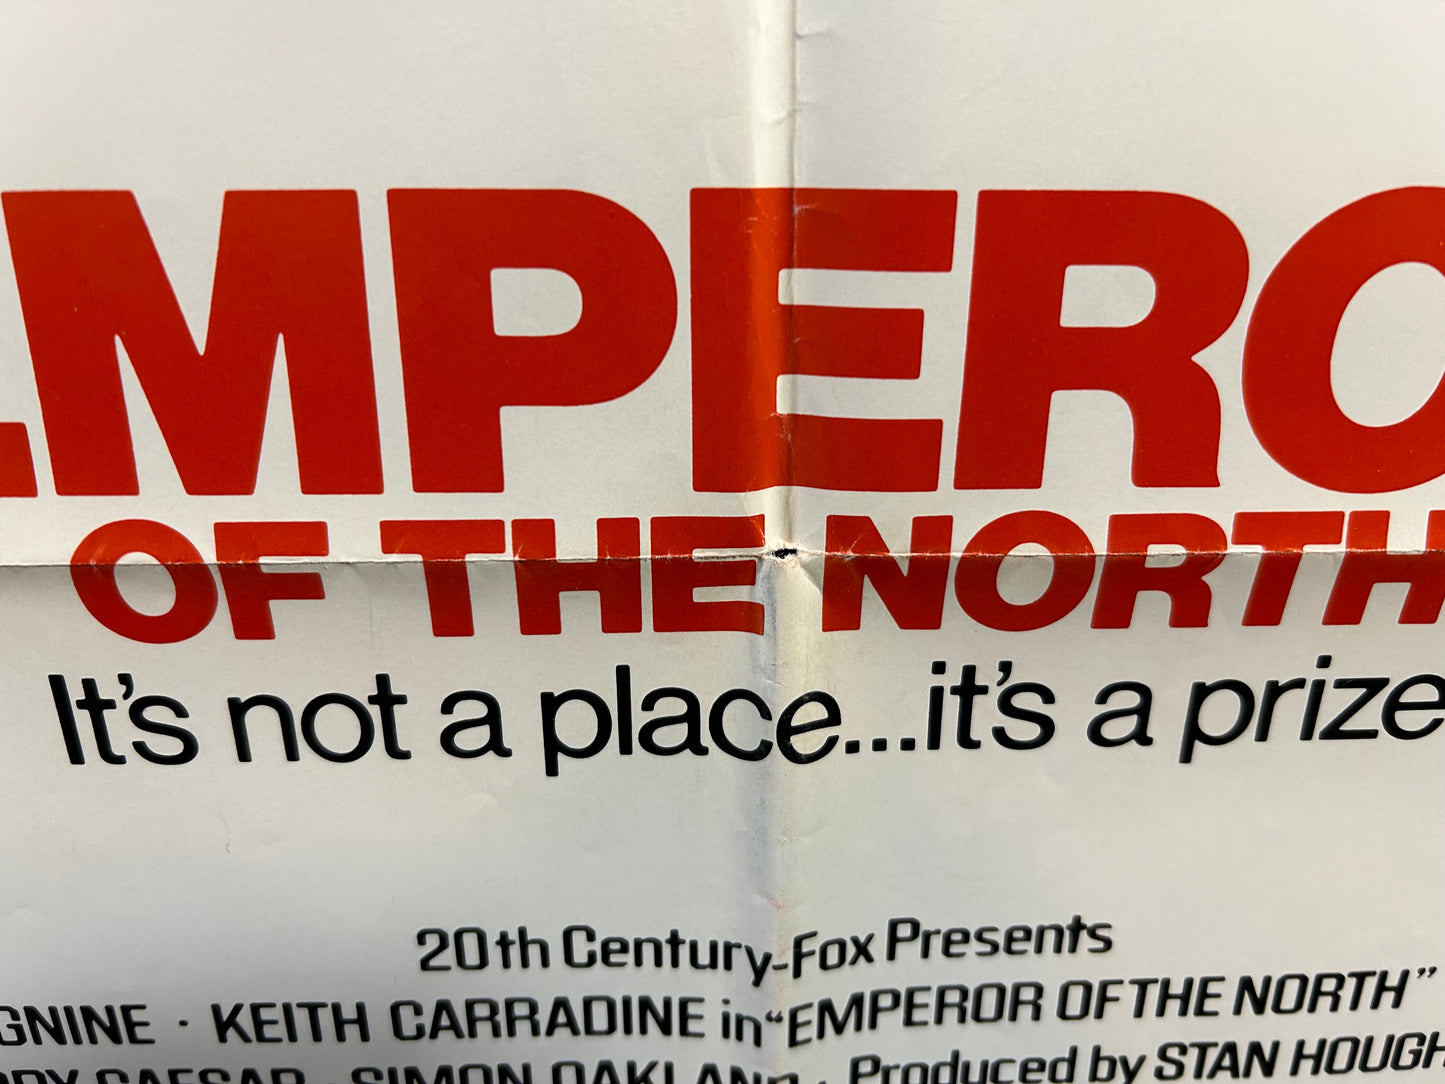 Emperor Of The North Original One Sheet Poster 1973